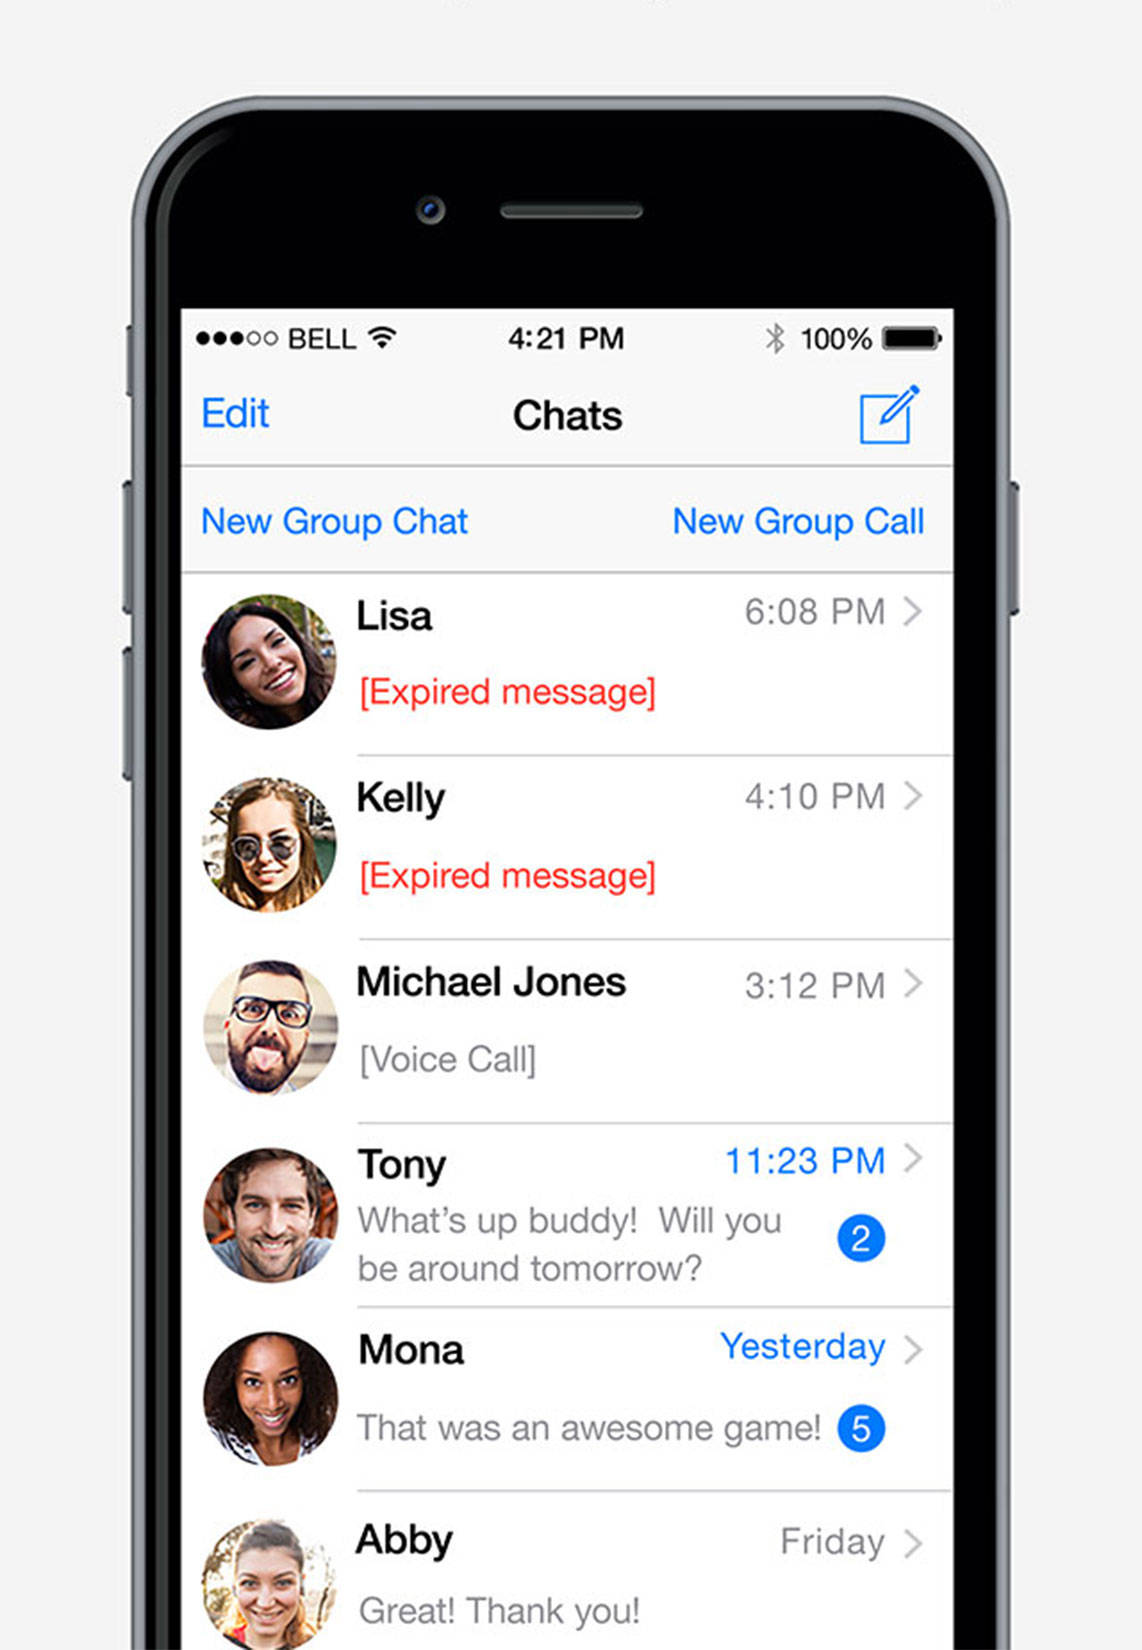 End-to-end encryption keep communications private and group chats can include up to 500 users.